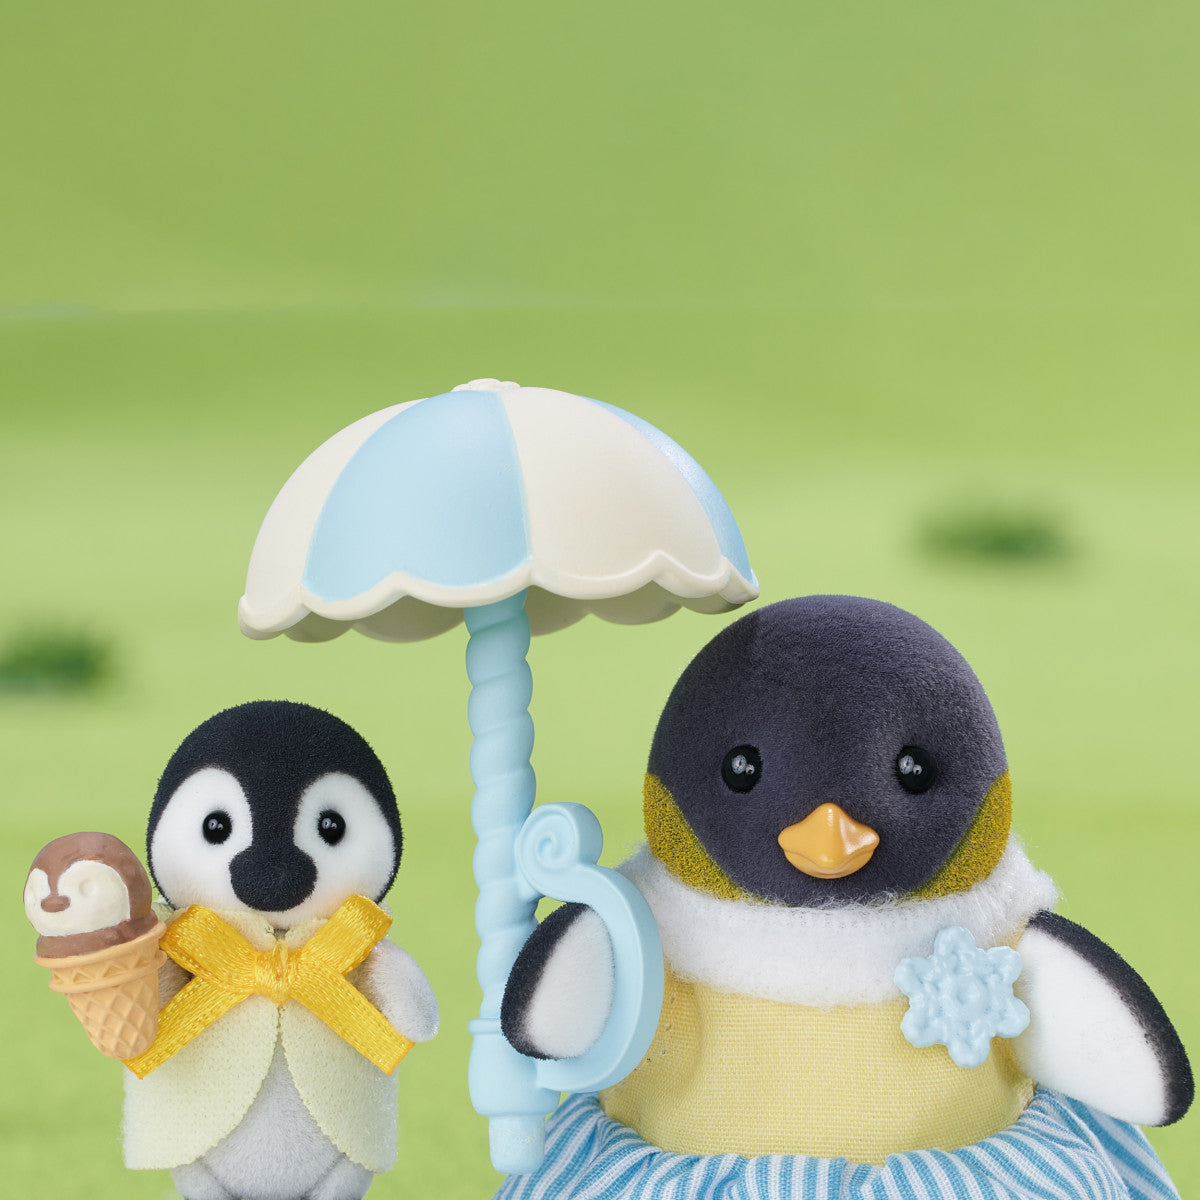 Calico Critters - Penguin Family